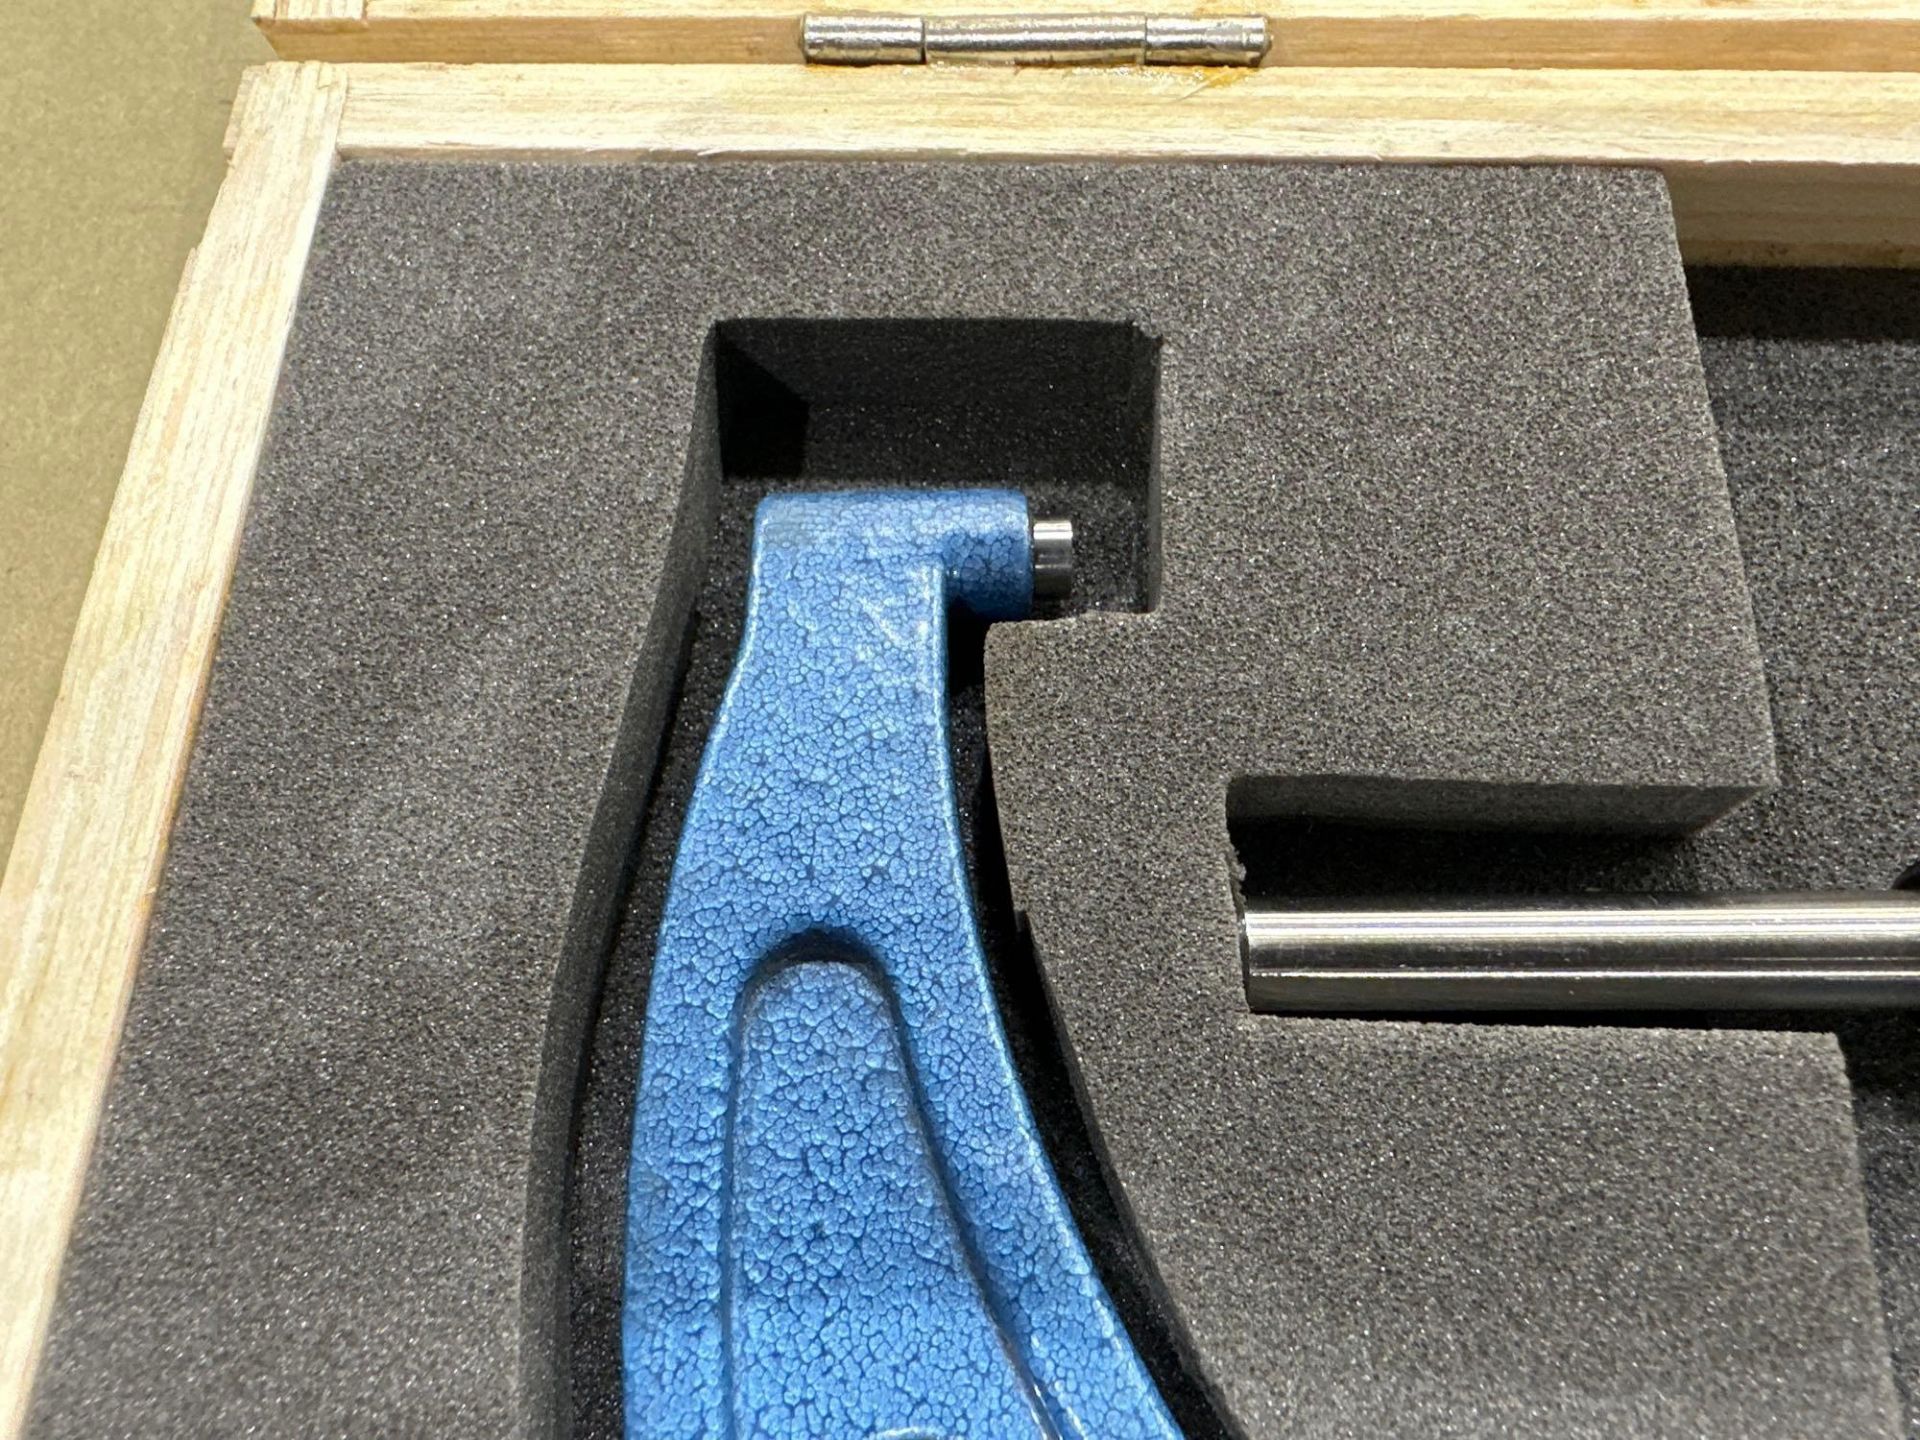 Fowler OD Micrometer No 52-240 Series, 6–7” Range, 0.0001” Graduation in wood case. See photo. - Image 4 of 6